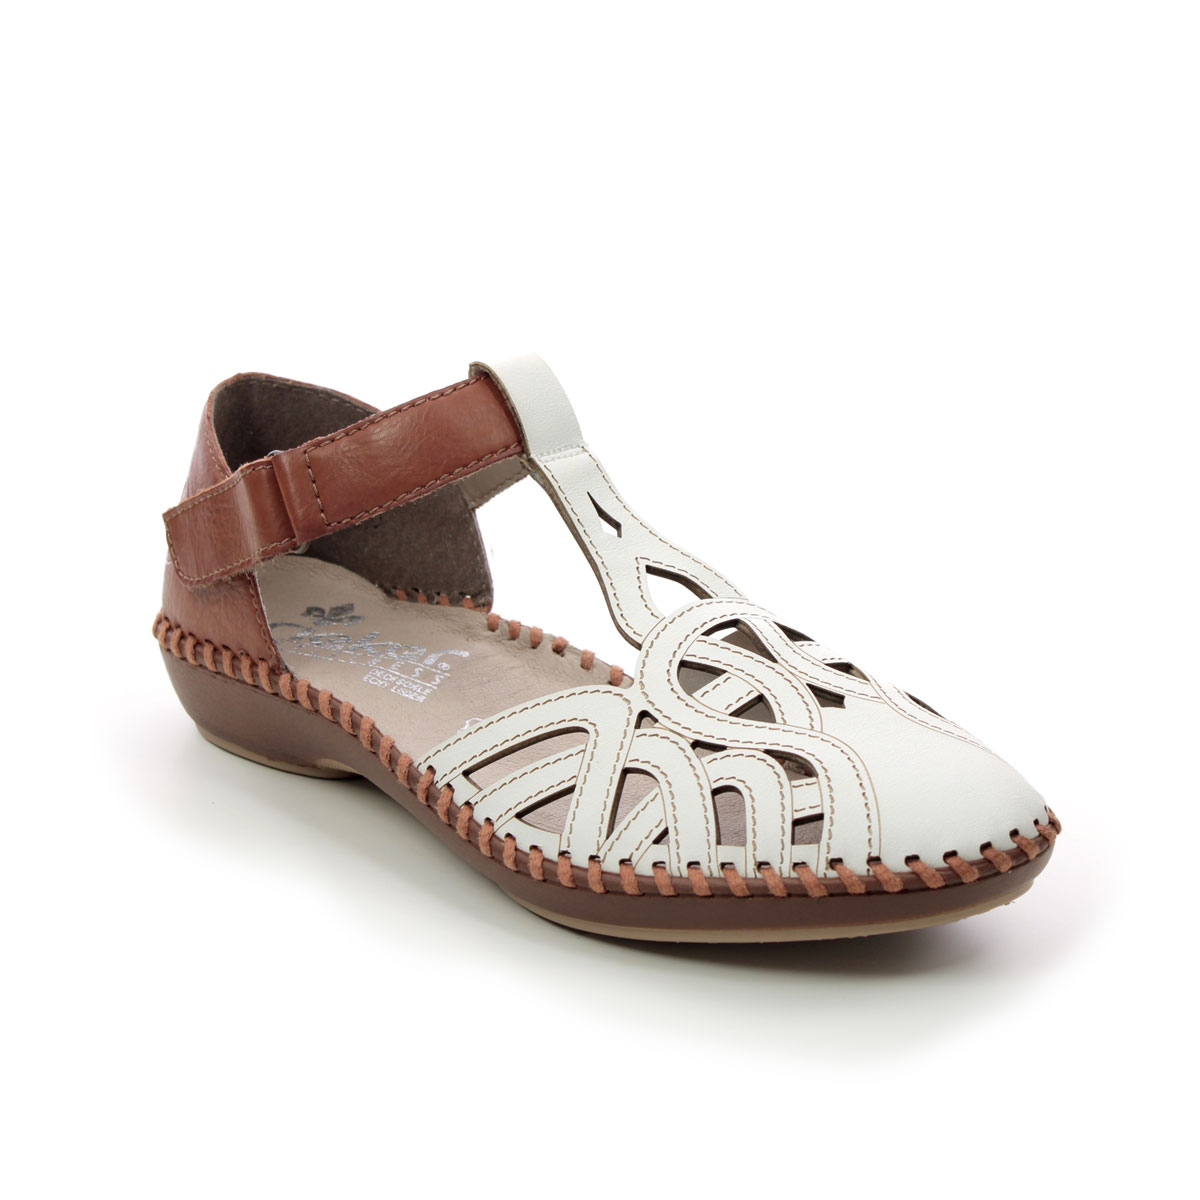 Rieker M1678-80 White-tan Womens Closed Toe Sandals in a Plain Leather in Size 40